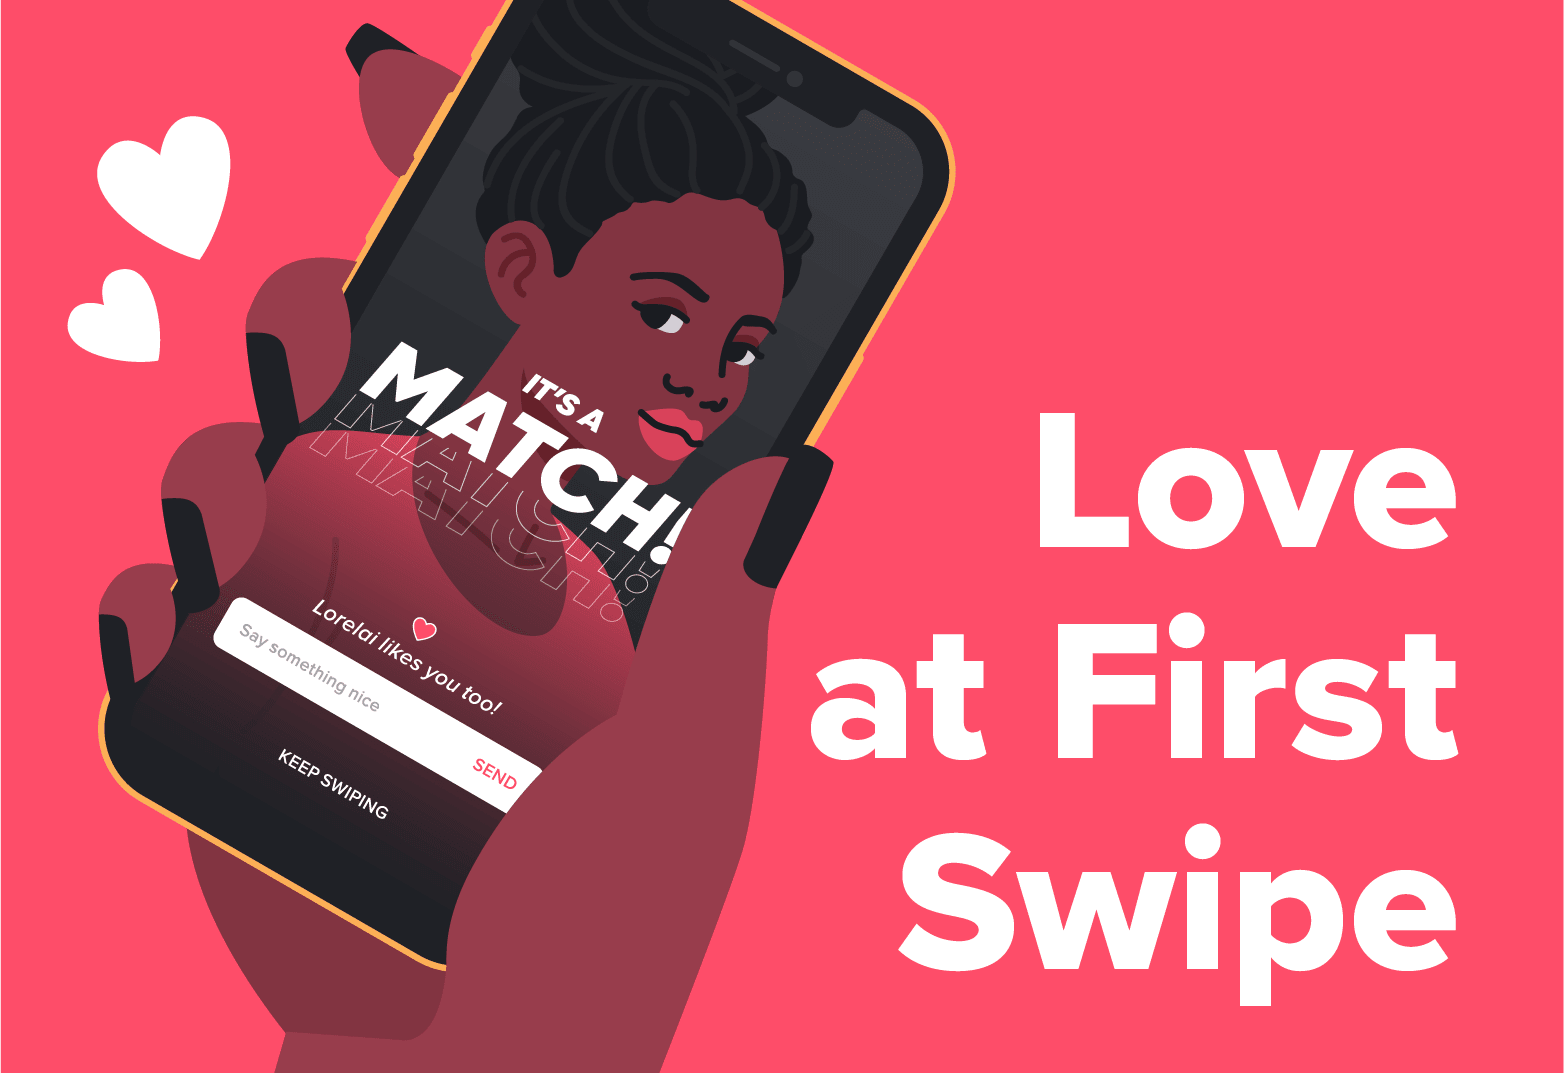 A header image for a blog about dating app usage and safety